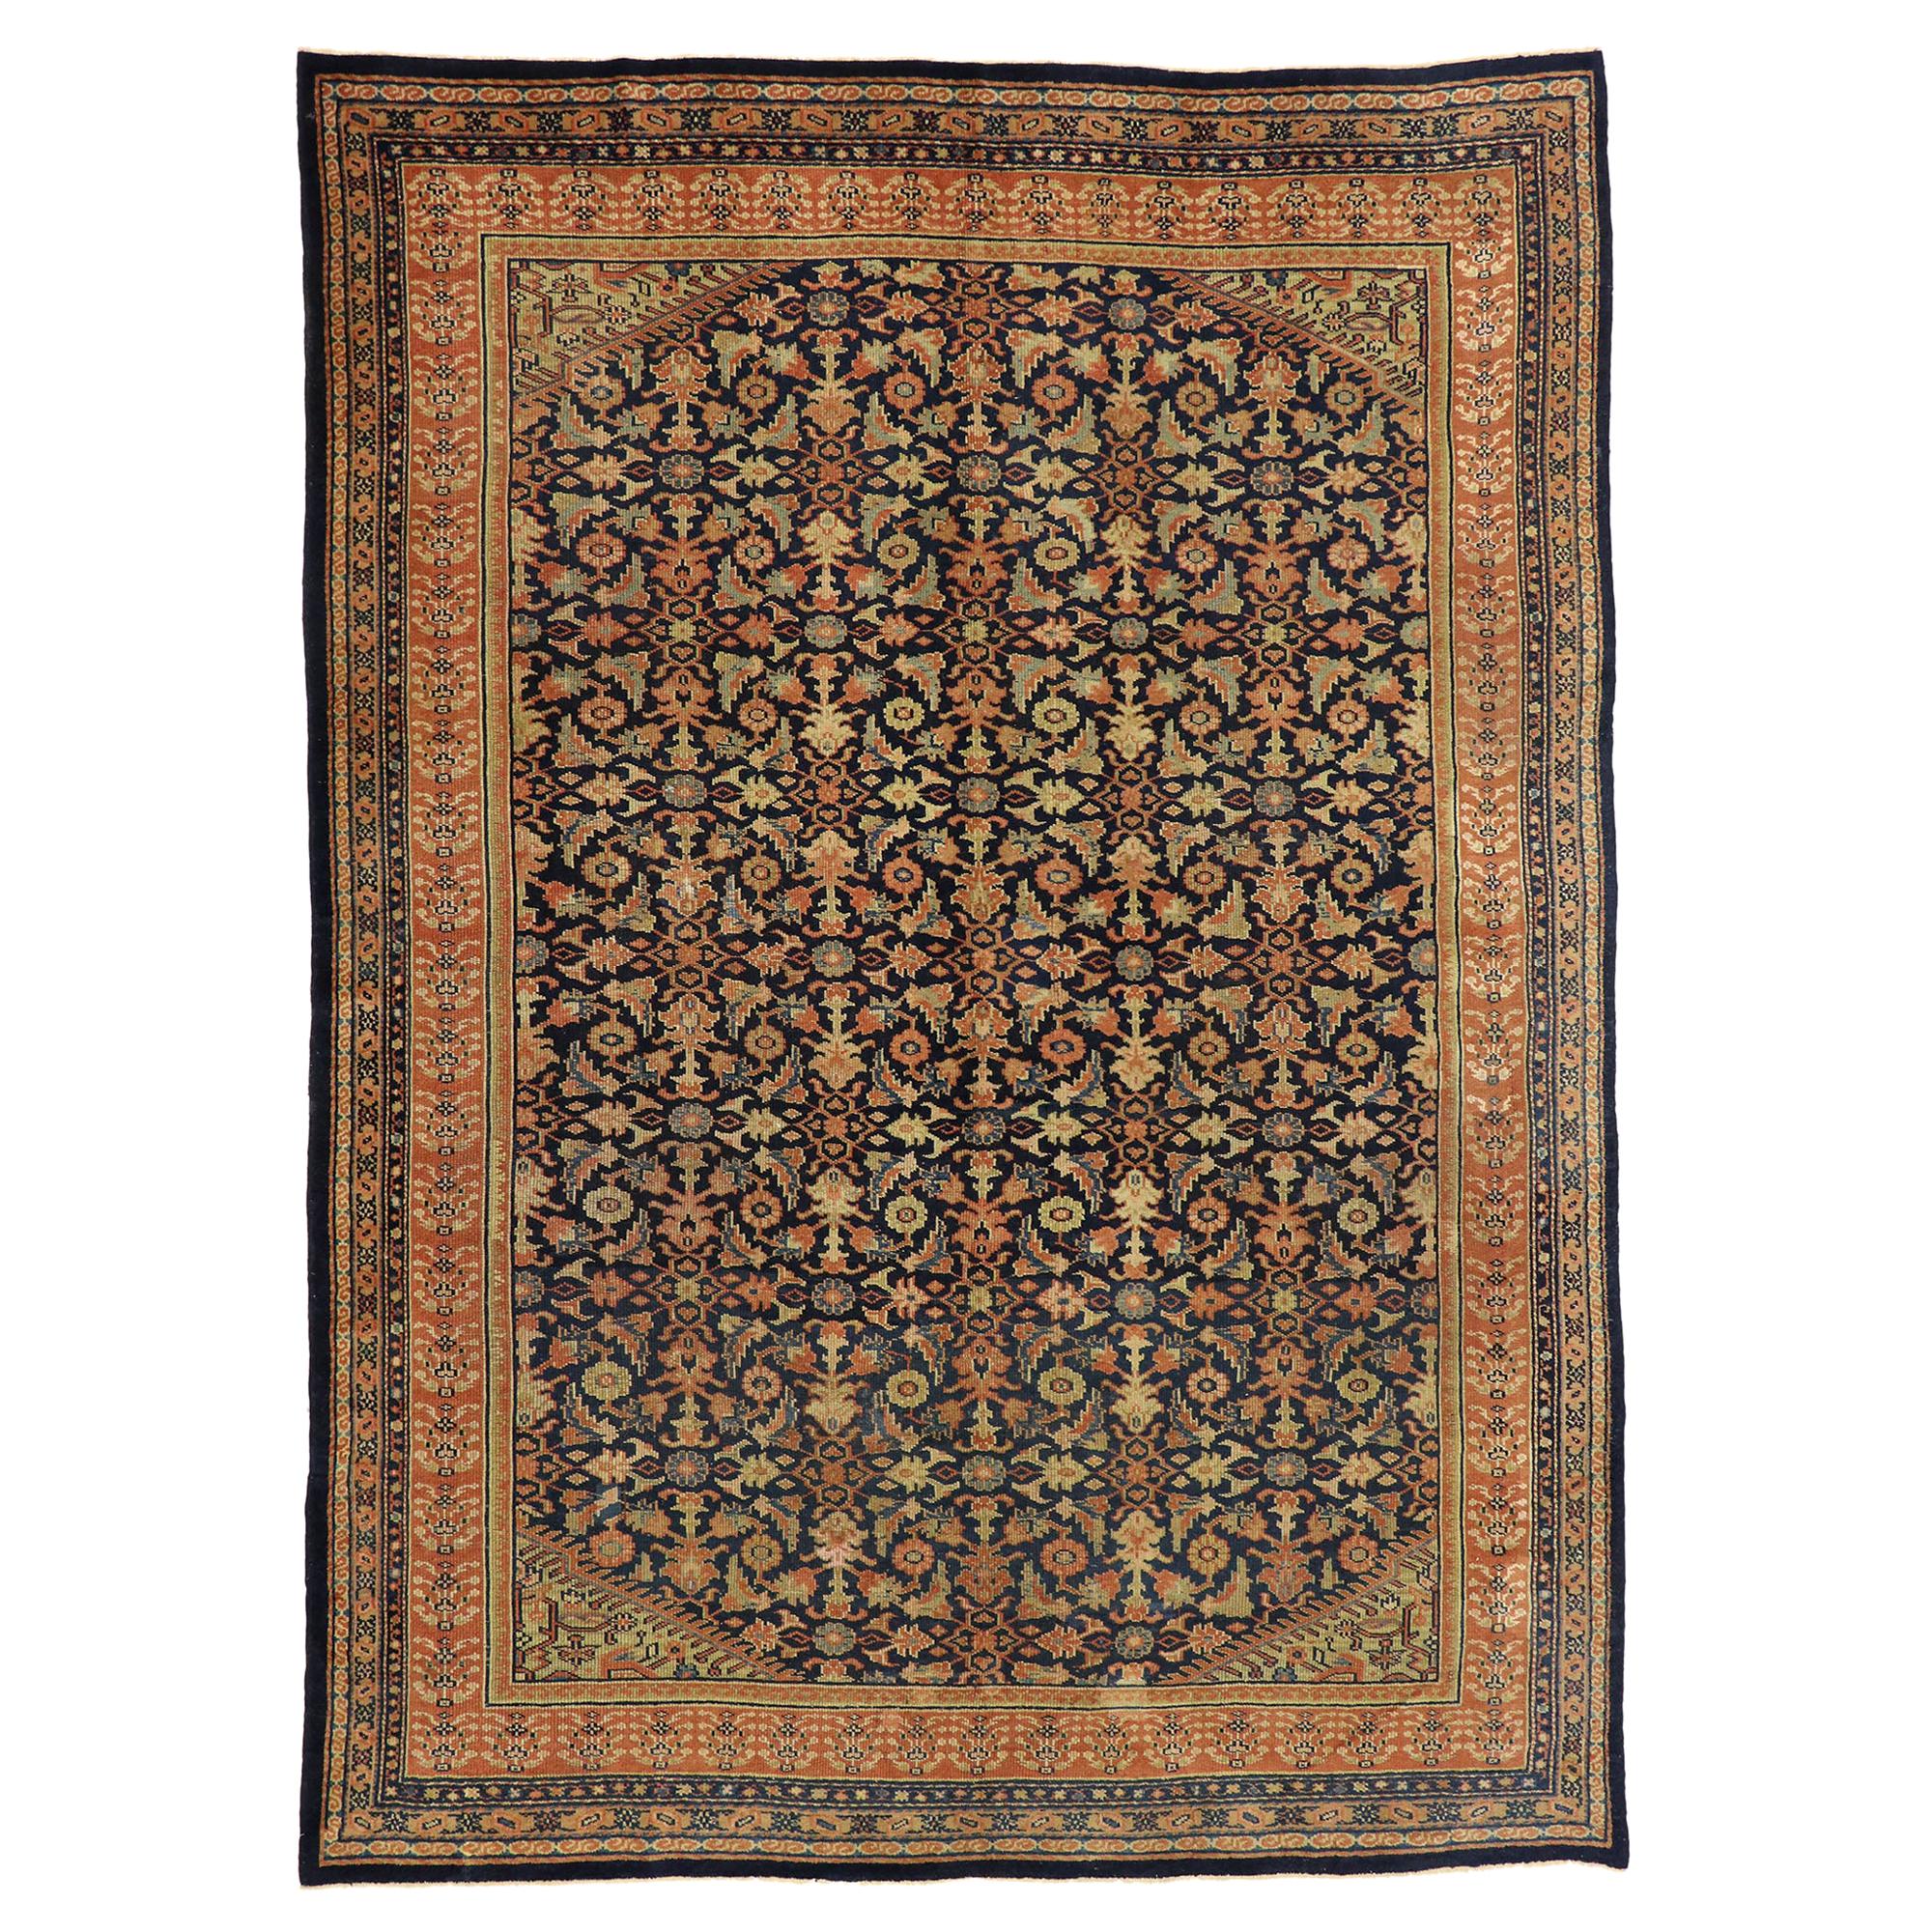 Late 19th Century Antique Persian Kurdish Rug with Traditional English Style